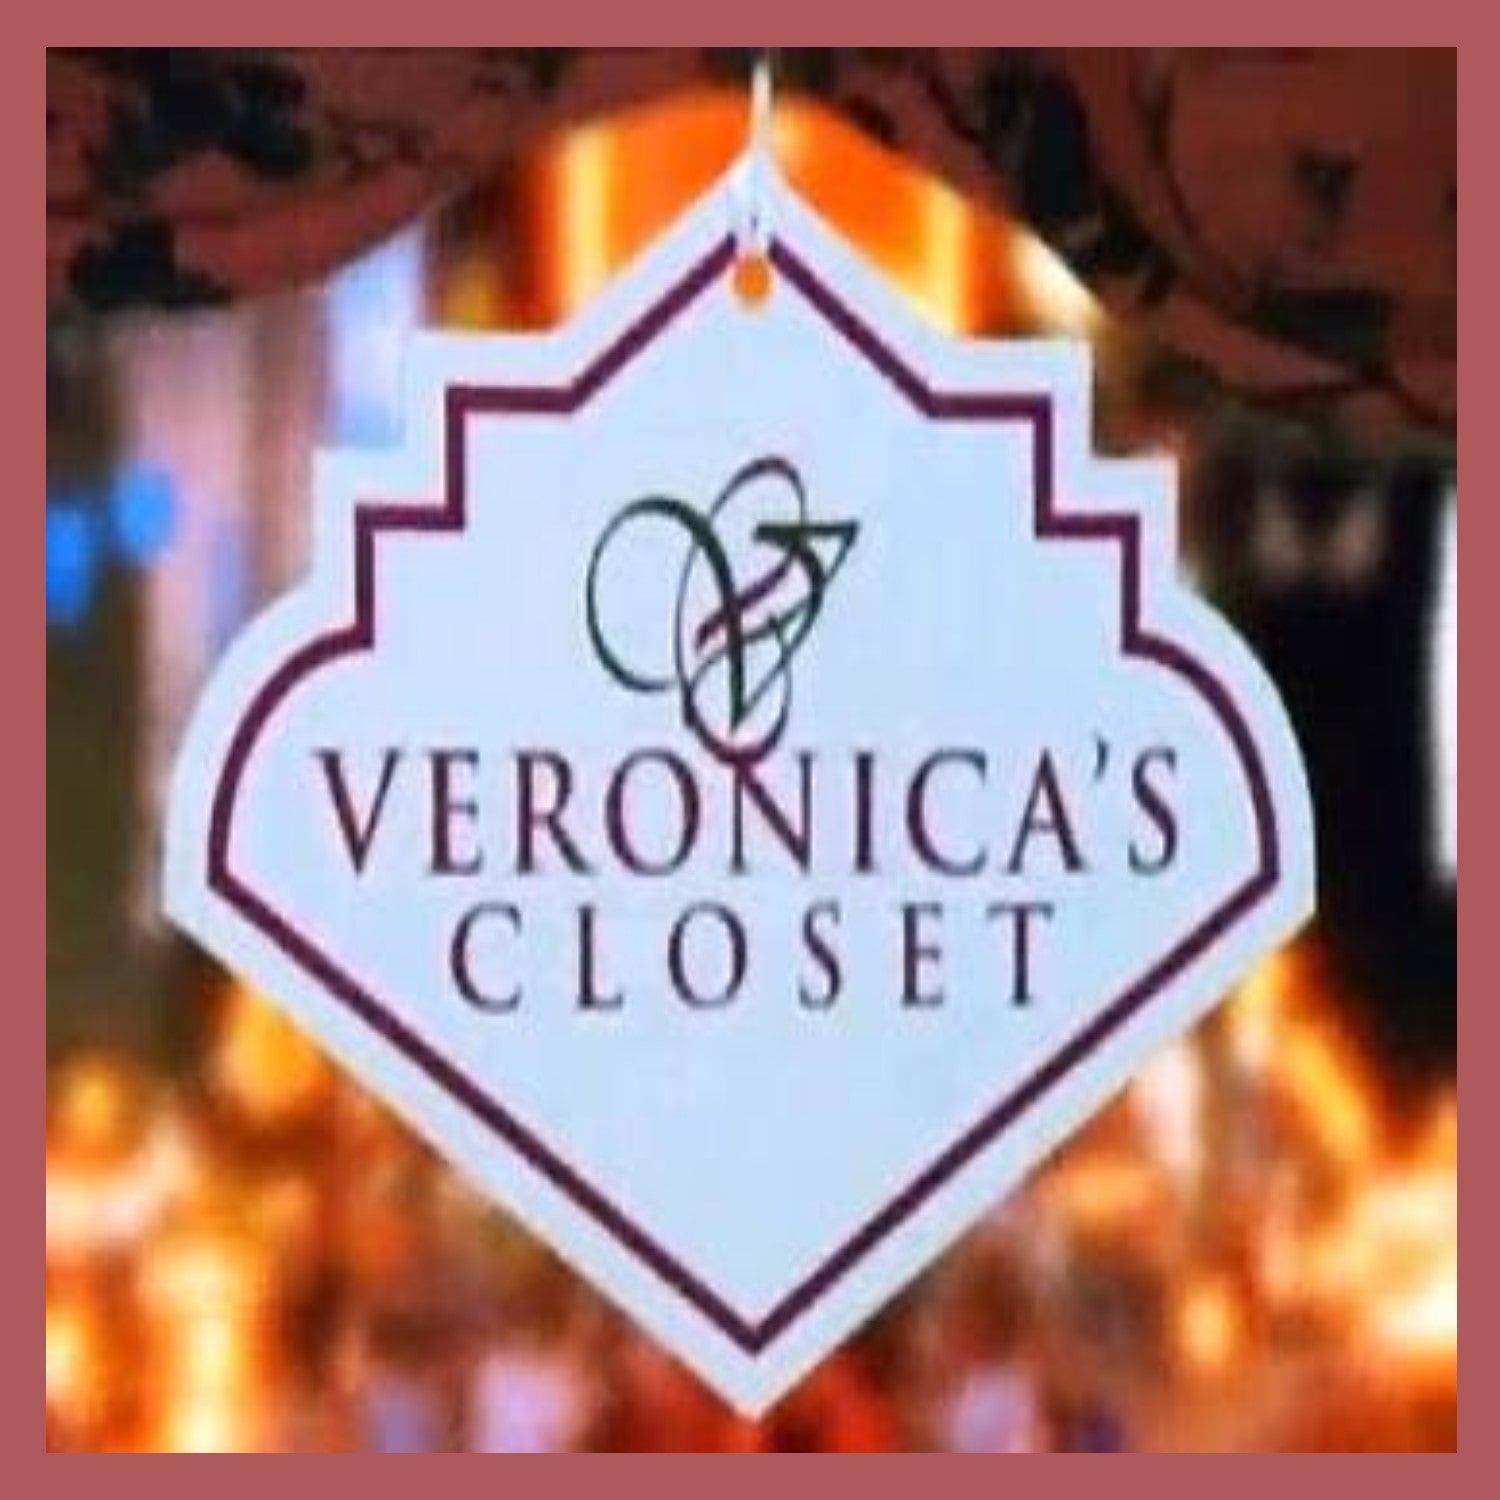 VERONICA'S CLOSET - THE COMPLETE SERIES (NBC 1997-00) - VERY RARE! Kirstie Alley, Kathy Najimy, Robert Prosky, Wallace Langham, Darryl 'Chill' Mitchell, Holland Taylor, Ron Silver, Christopher McDonald